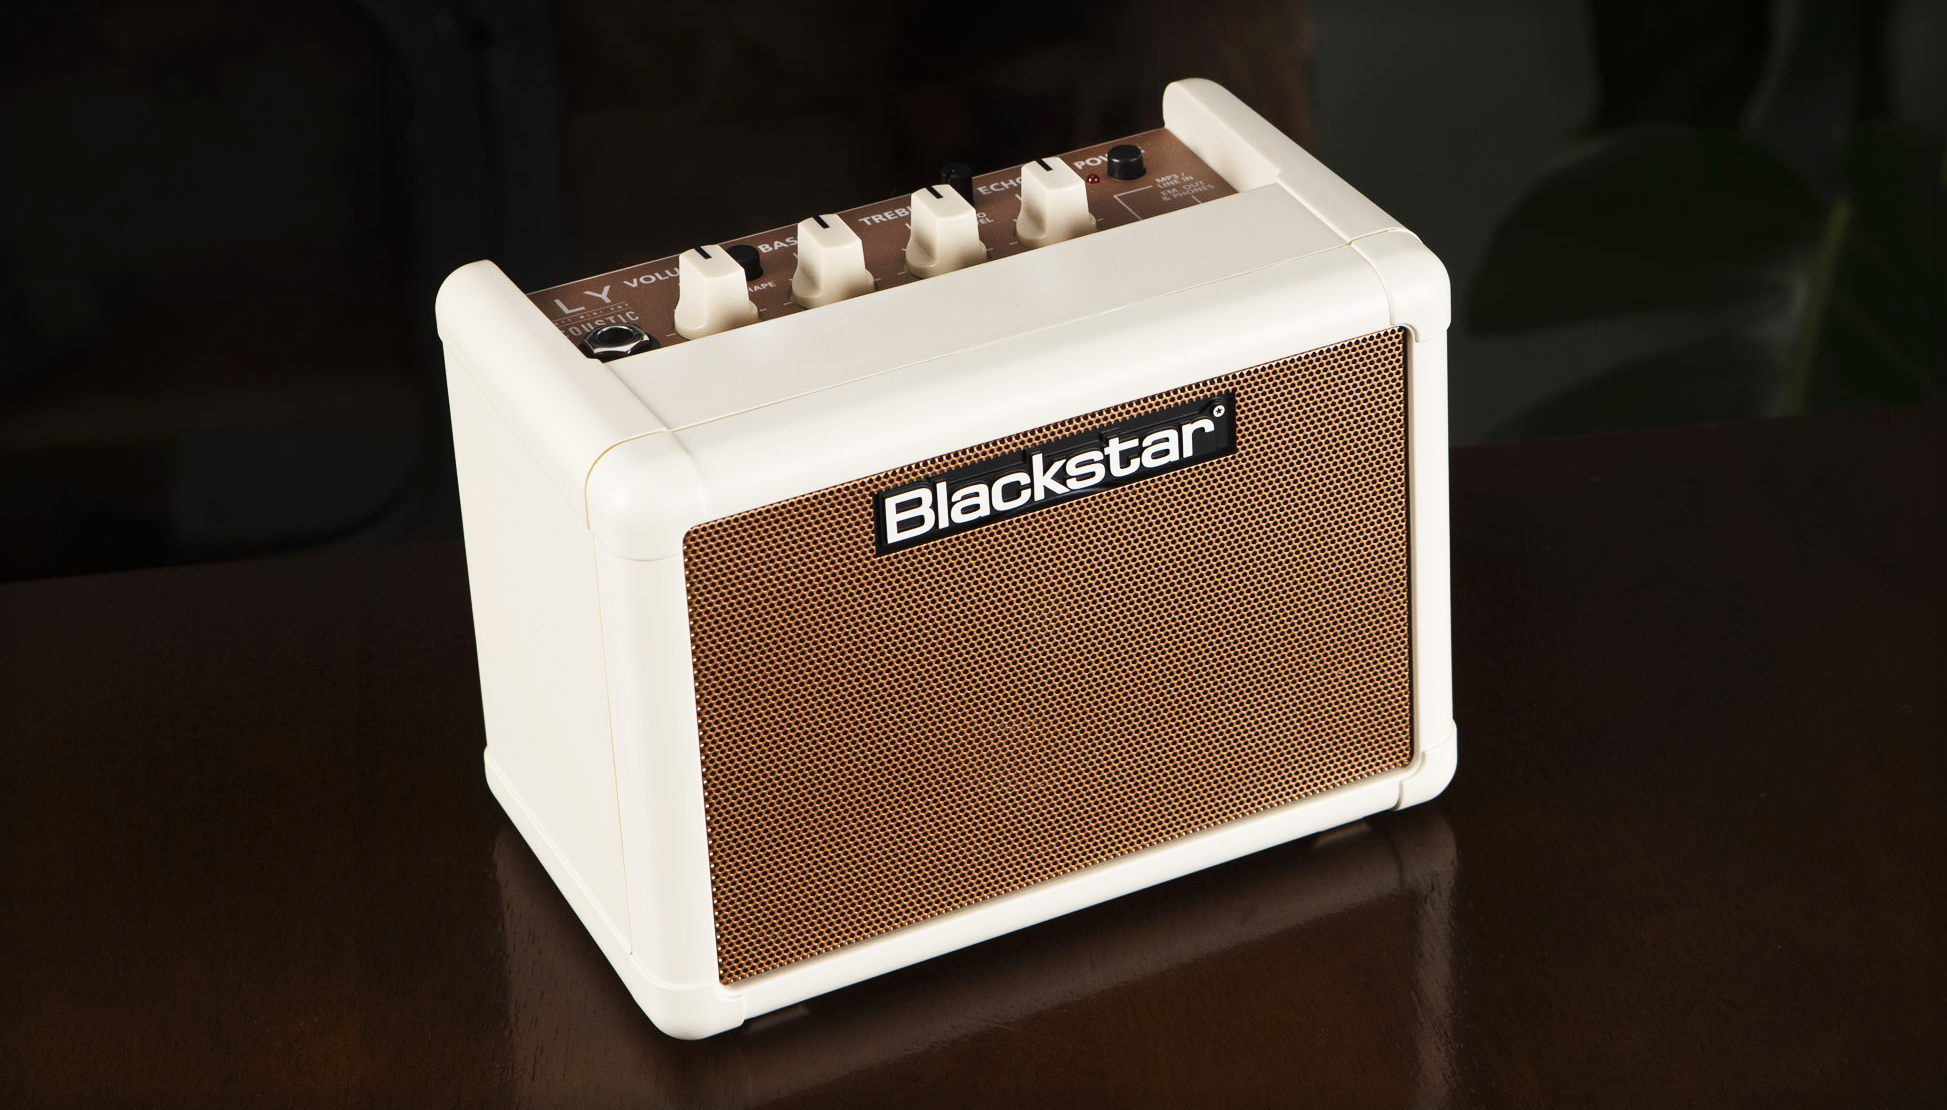 Blackstar is releasing an acoustic version of its awesome Fly 3 